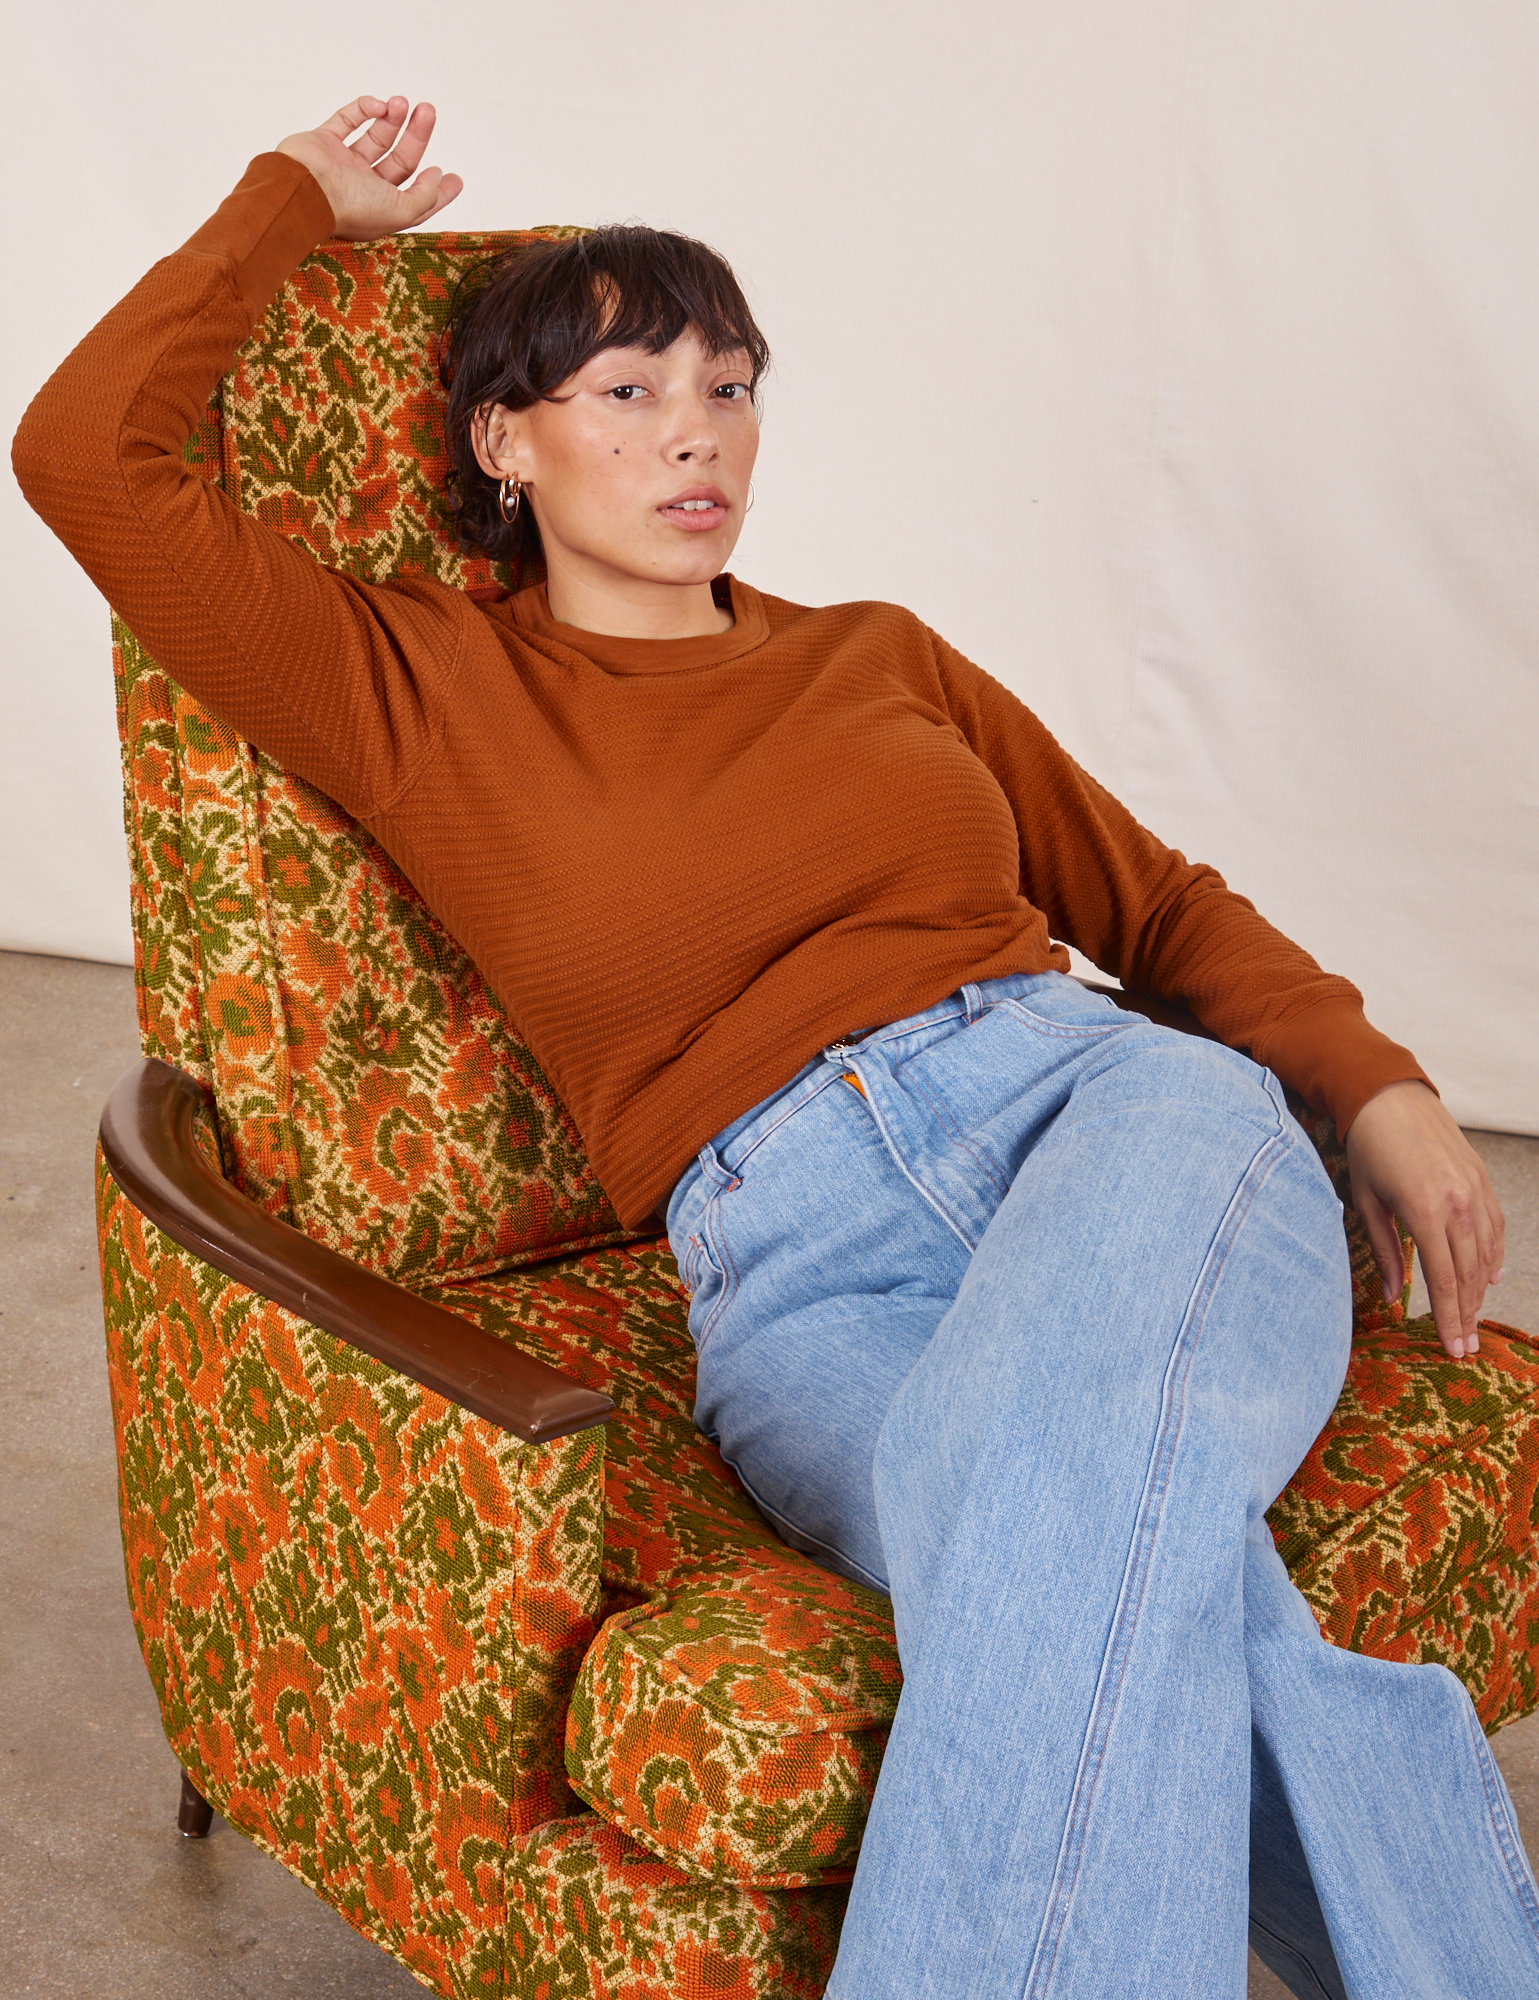 Tiara is sitting on an upholstered chair wearing Honeycomb Thermal in Burnt Terracotta